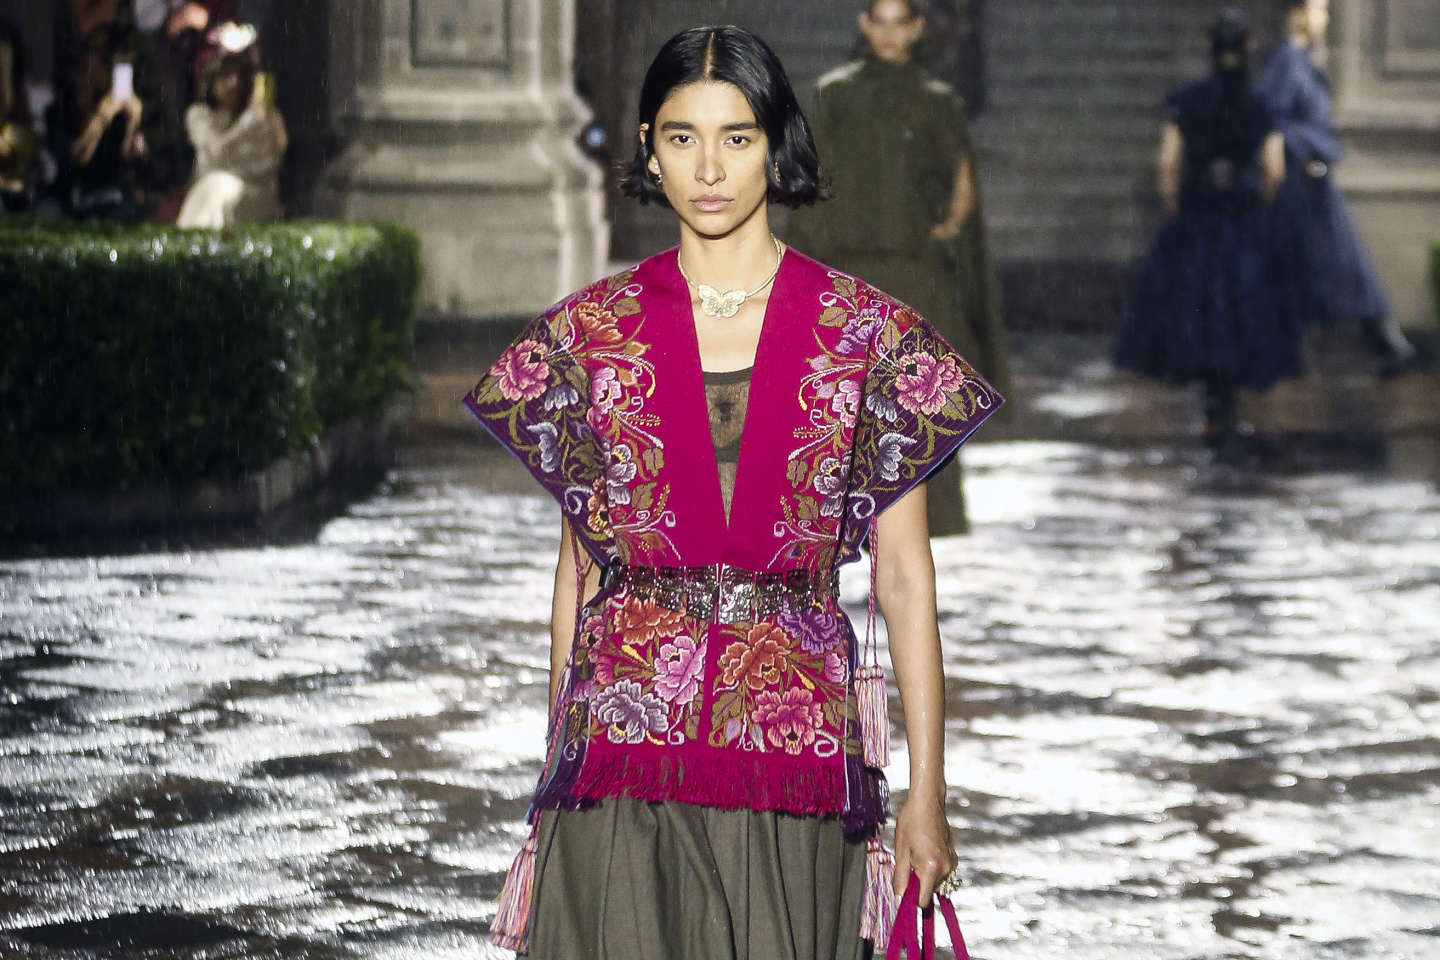 In Mexico City, Dior celebrates Frida Kahlo and local know-how